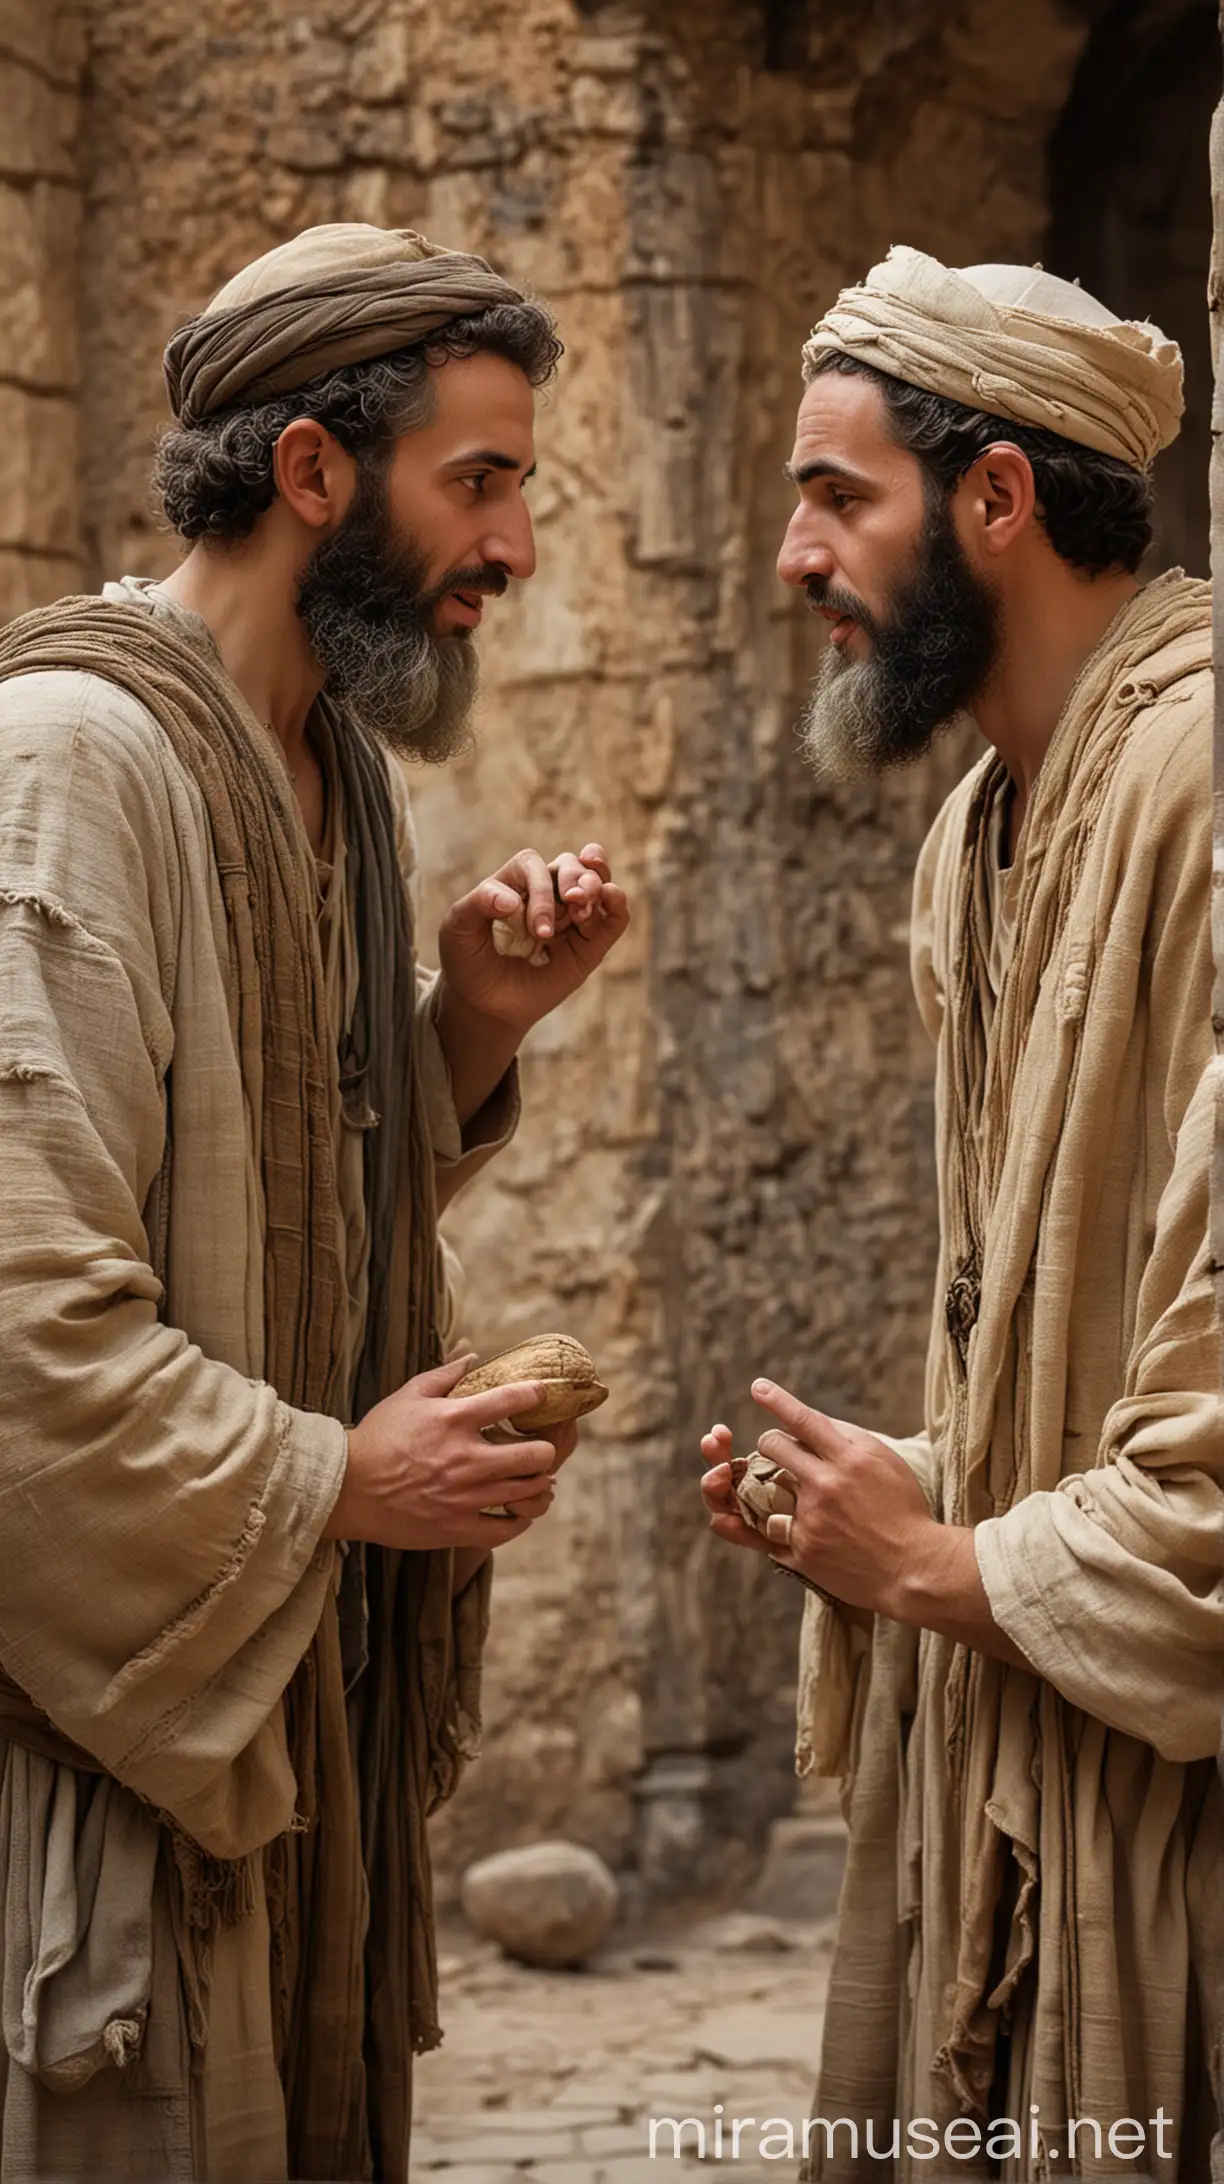 Two Jewish men discuss in ancient world 